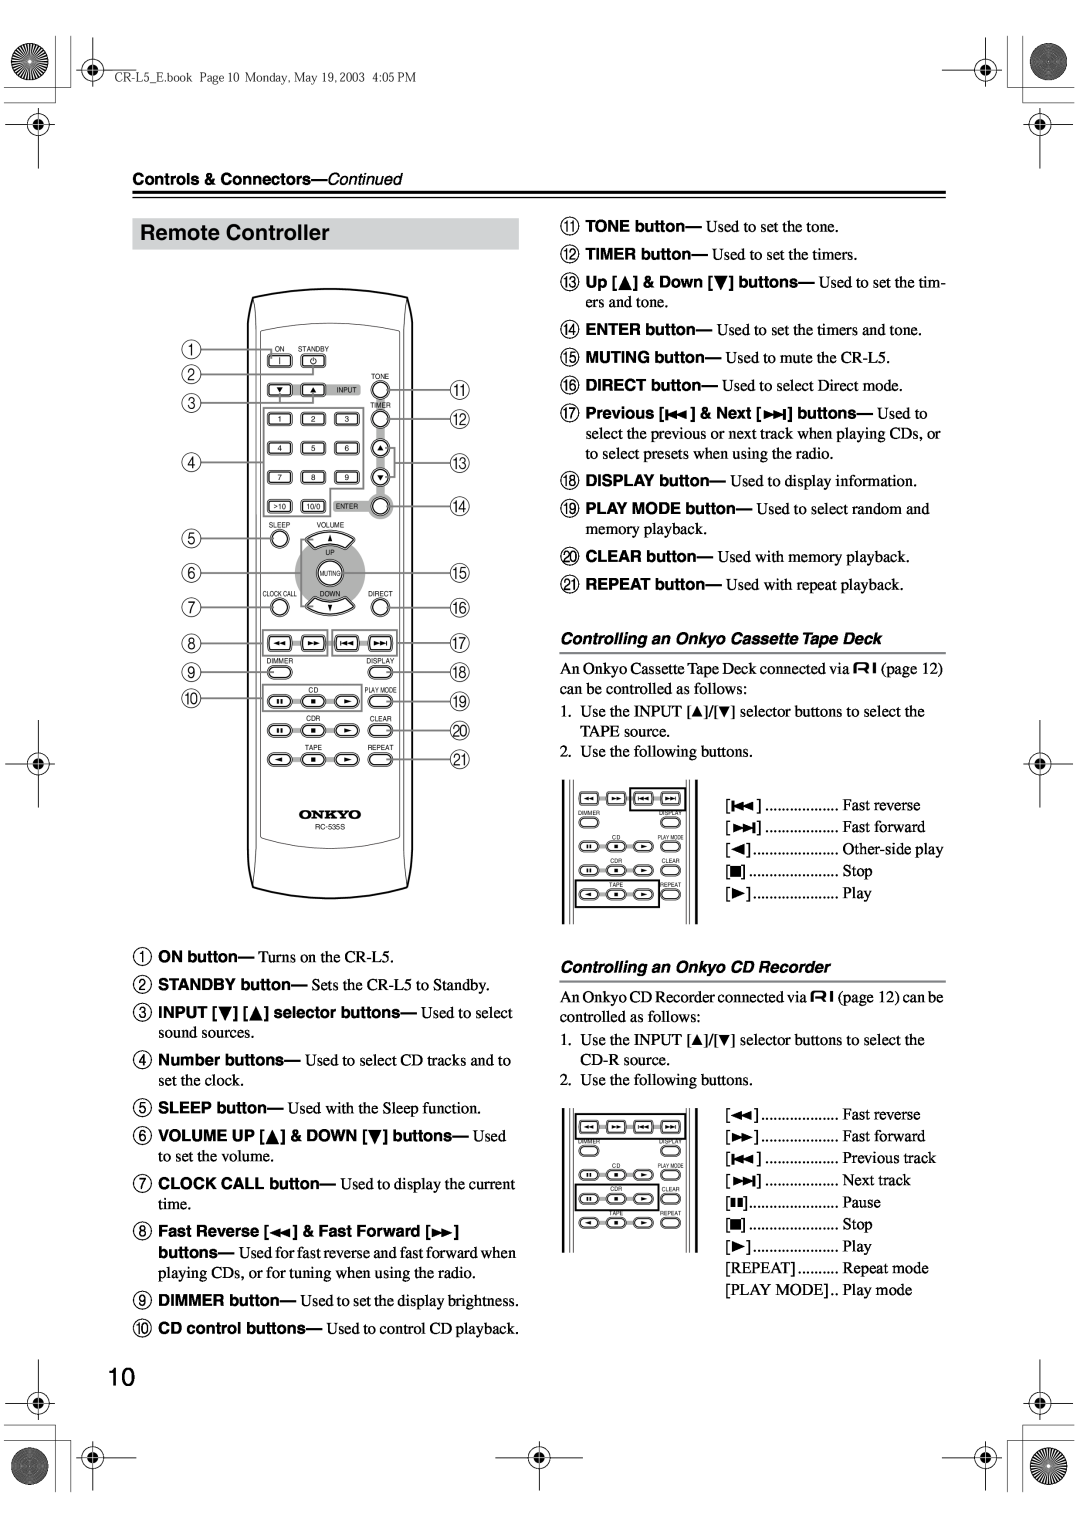 Onkyo CR-L5 instruction manual Remote Controller 